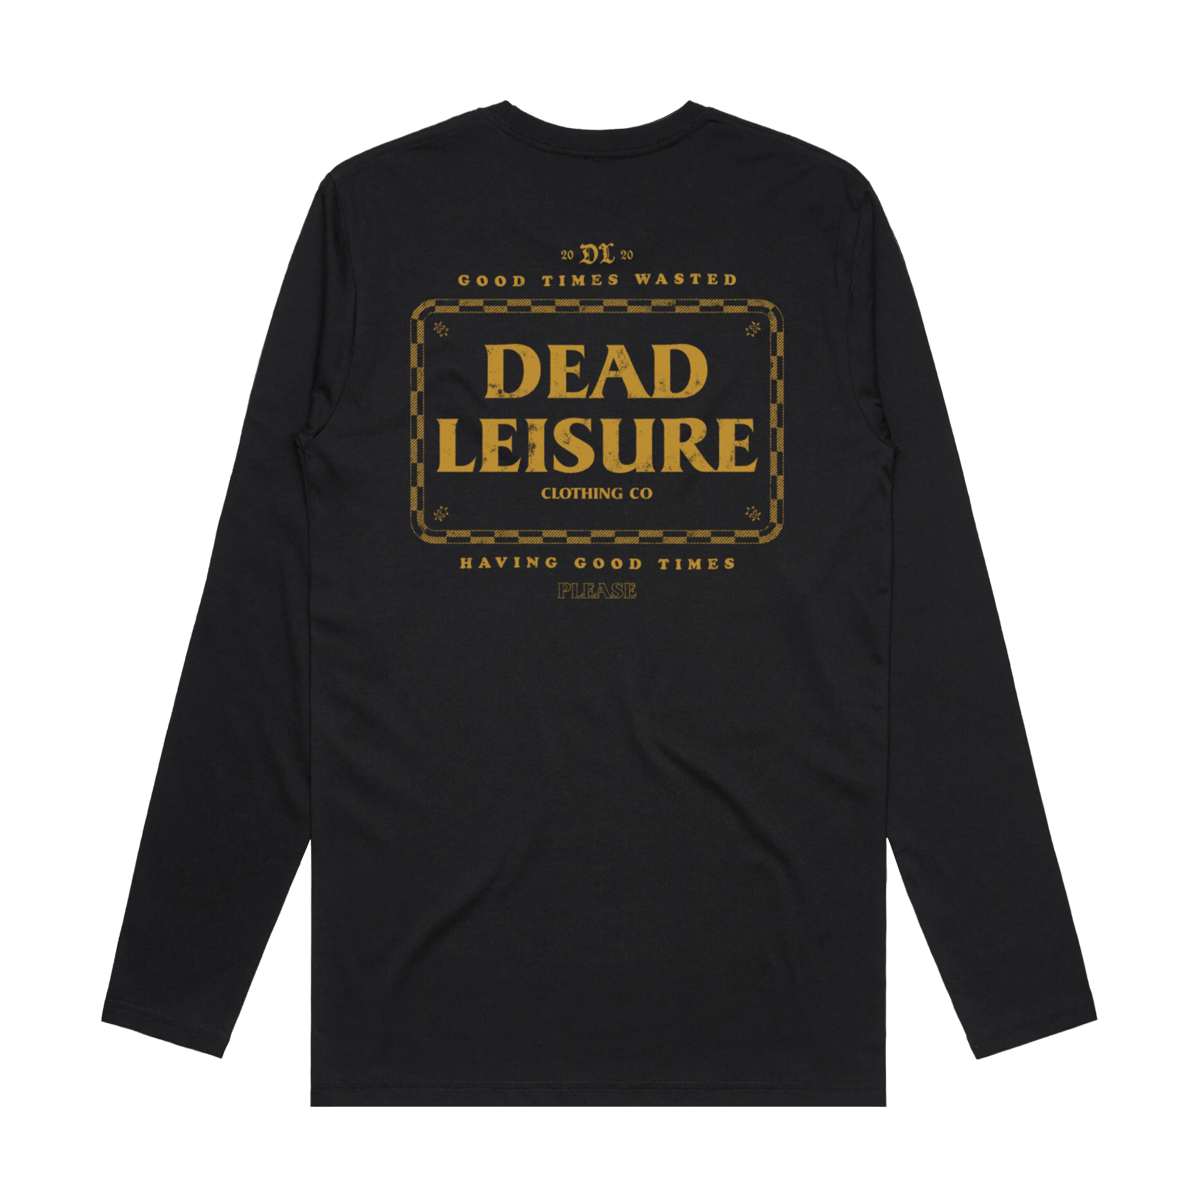 Good Times Wasted Long Sleeve Tee